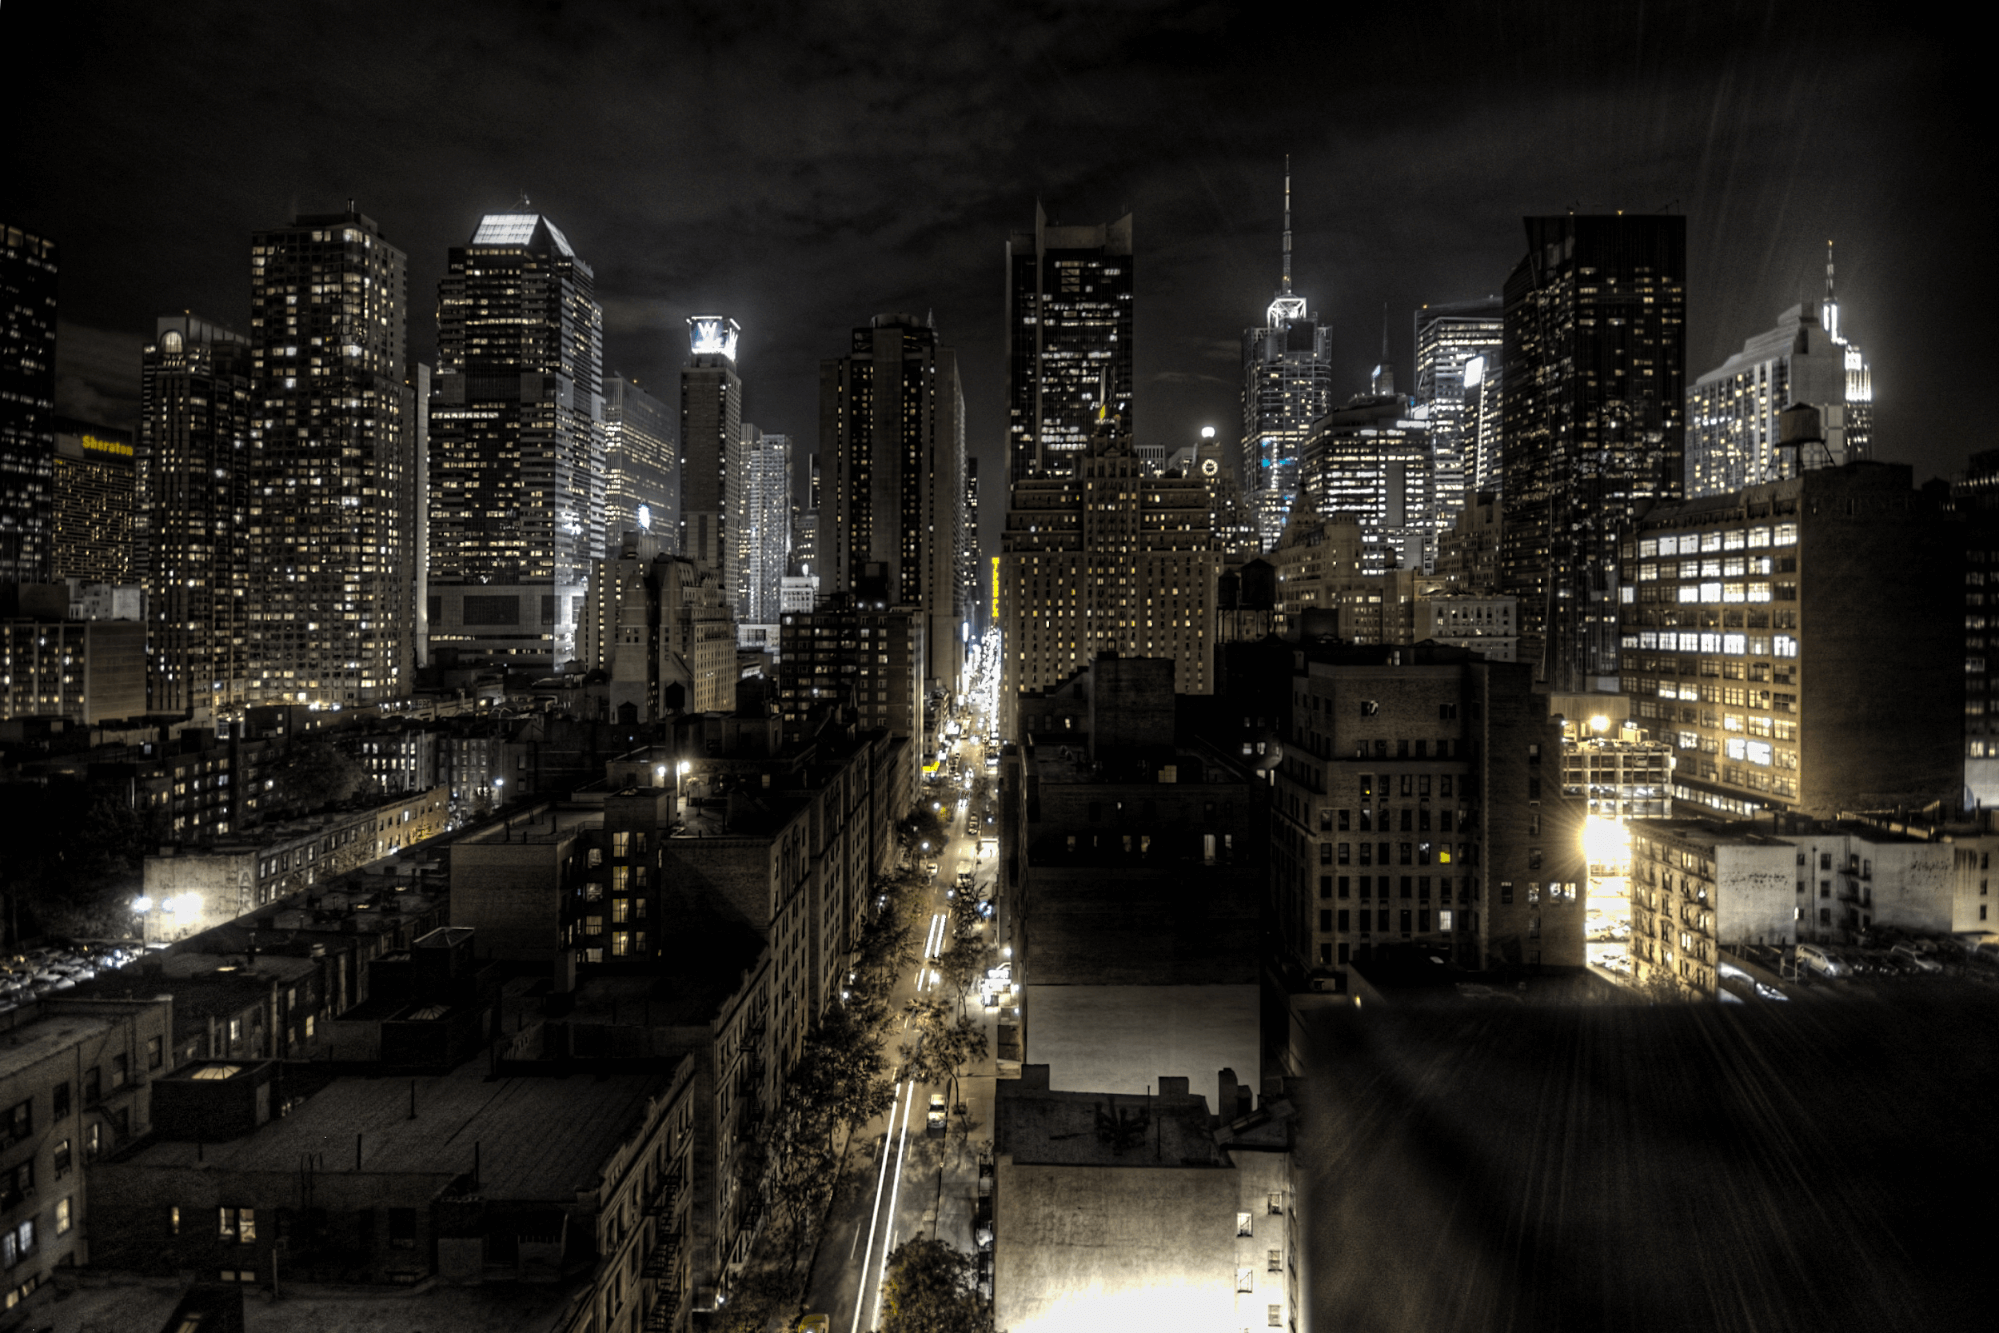 Cities are filled with light after dark by building windows and street lamps